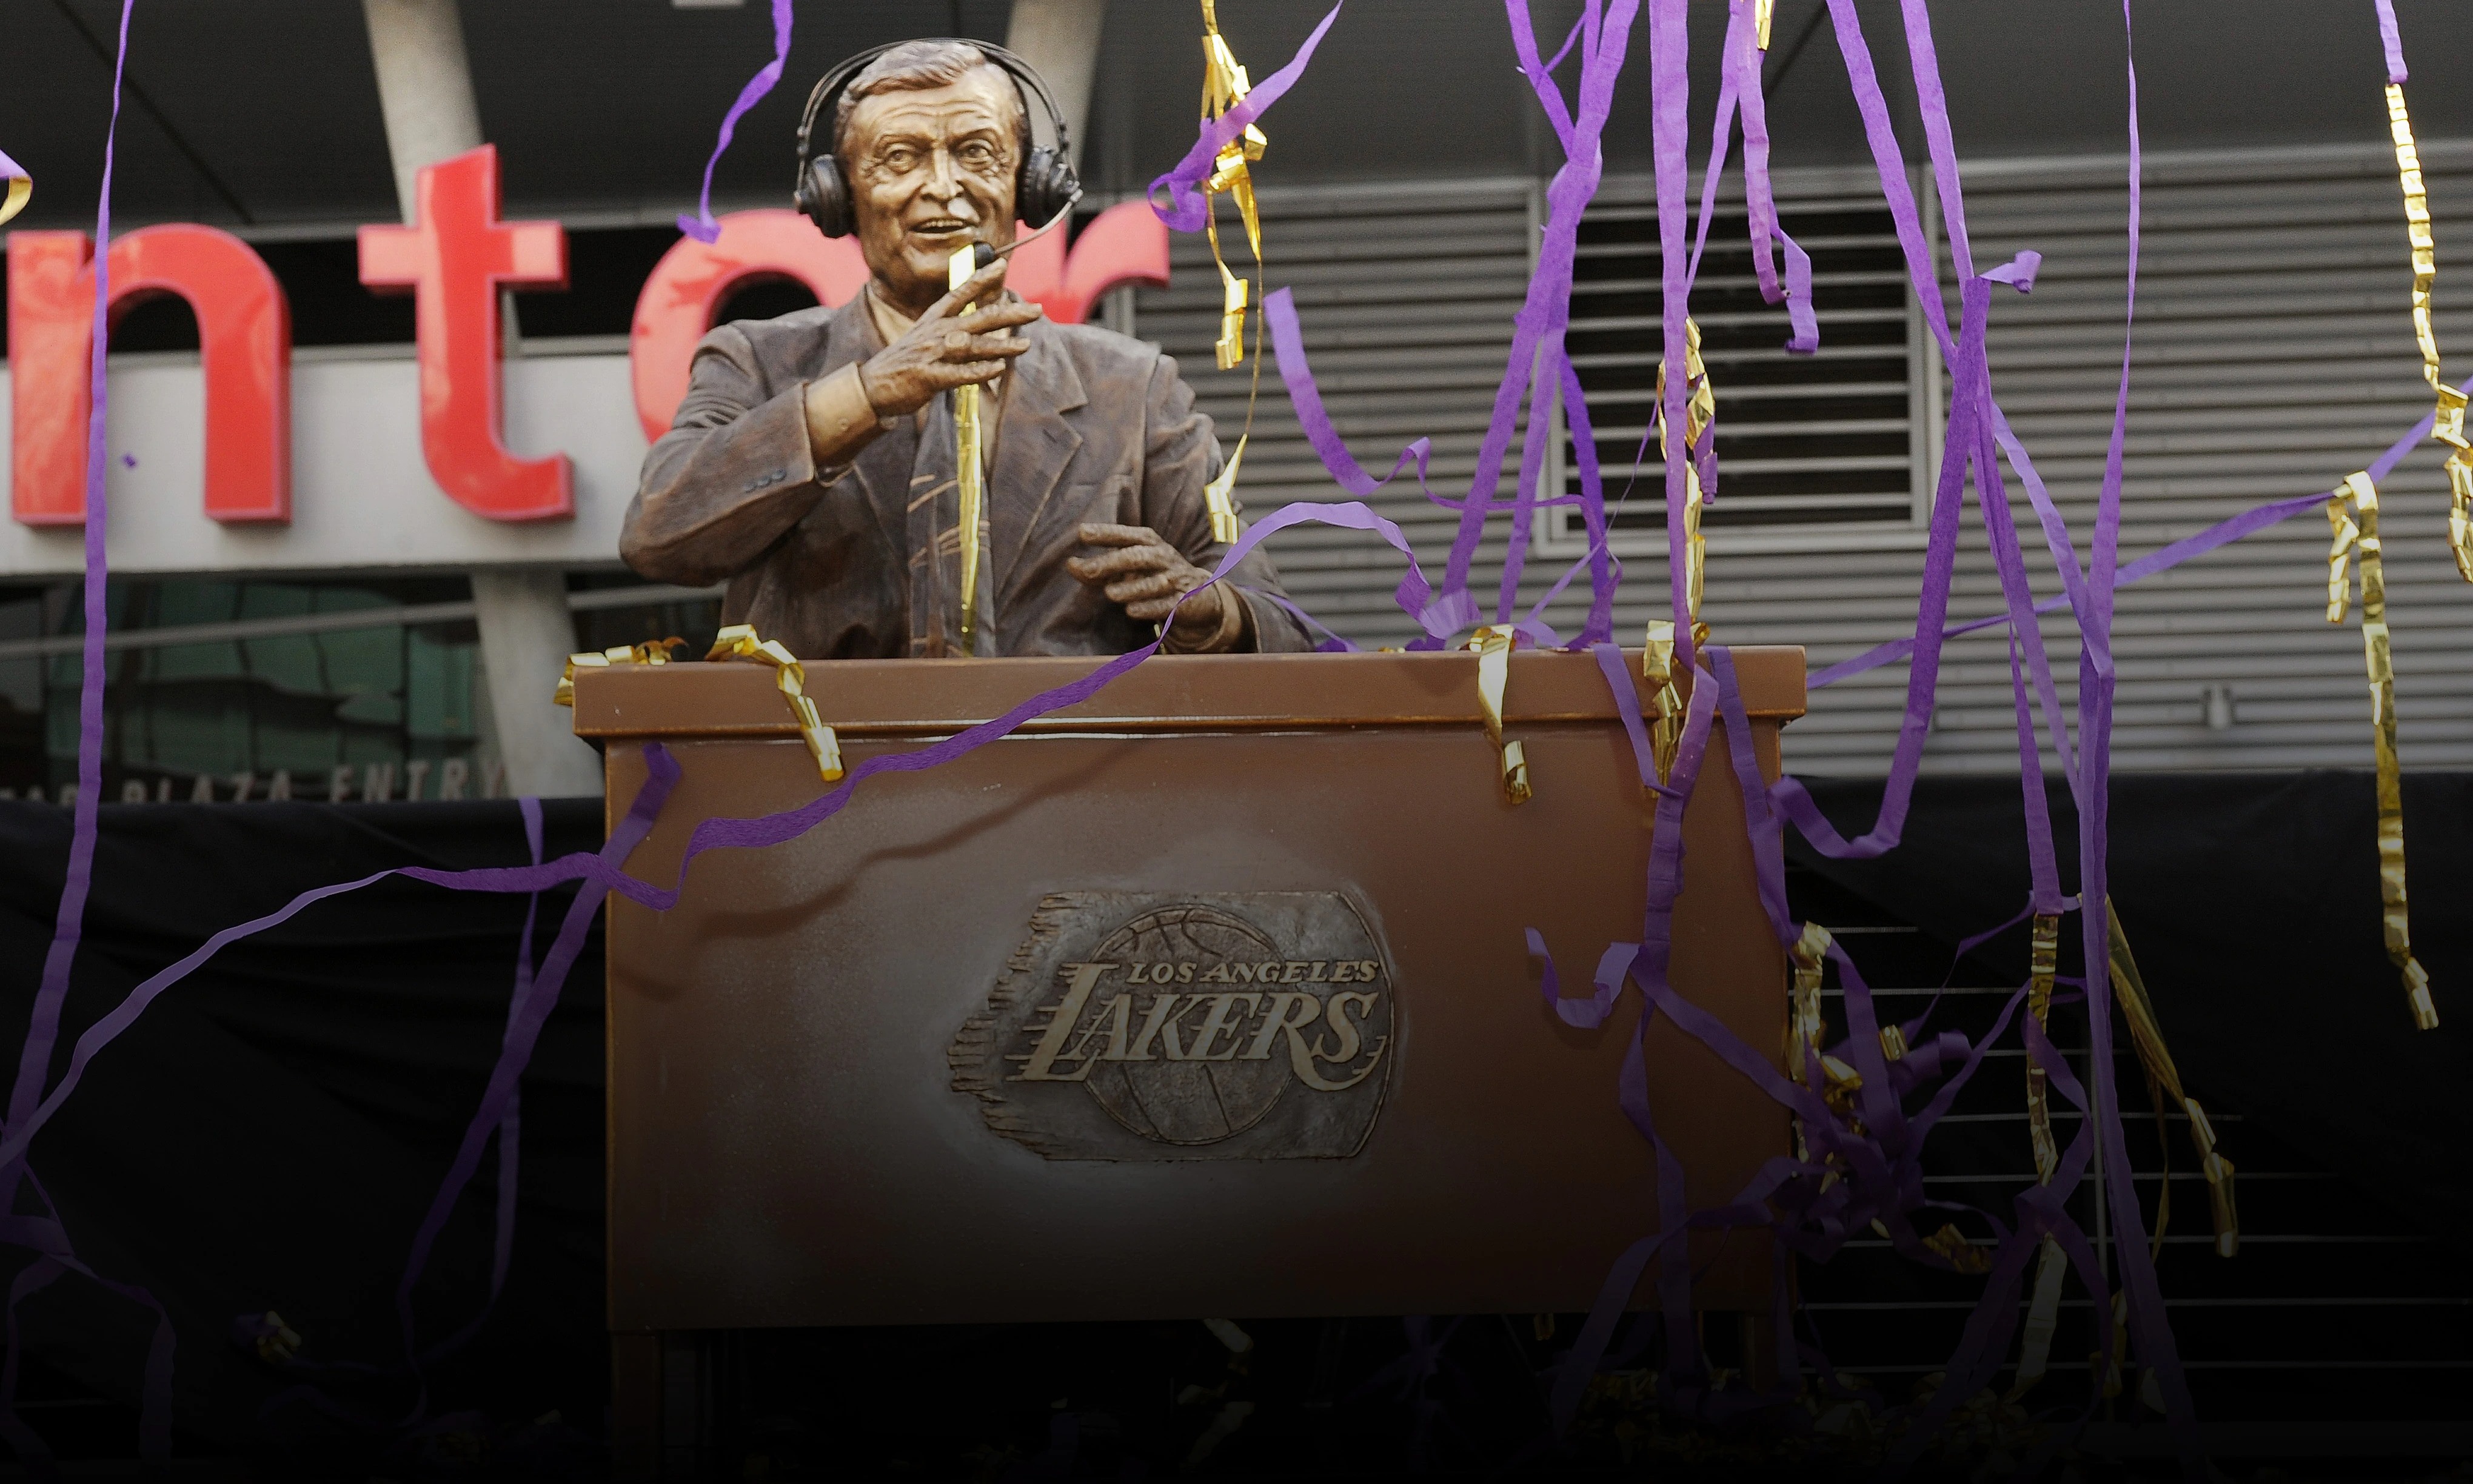 Chick Hearn History, Los Angeles Lakers